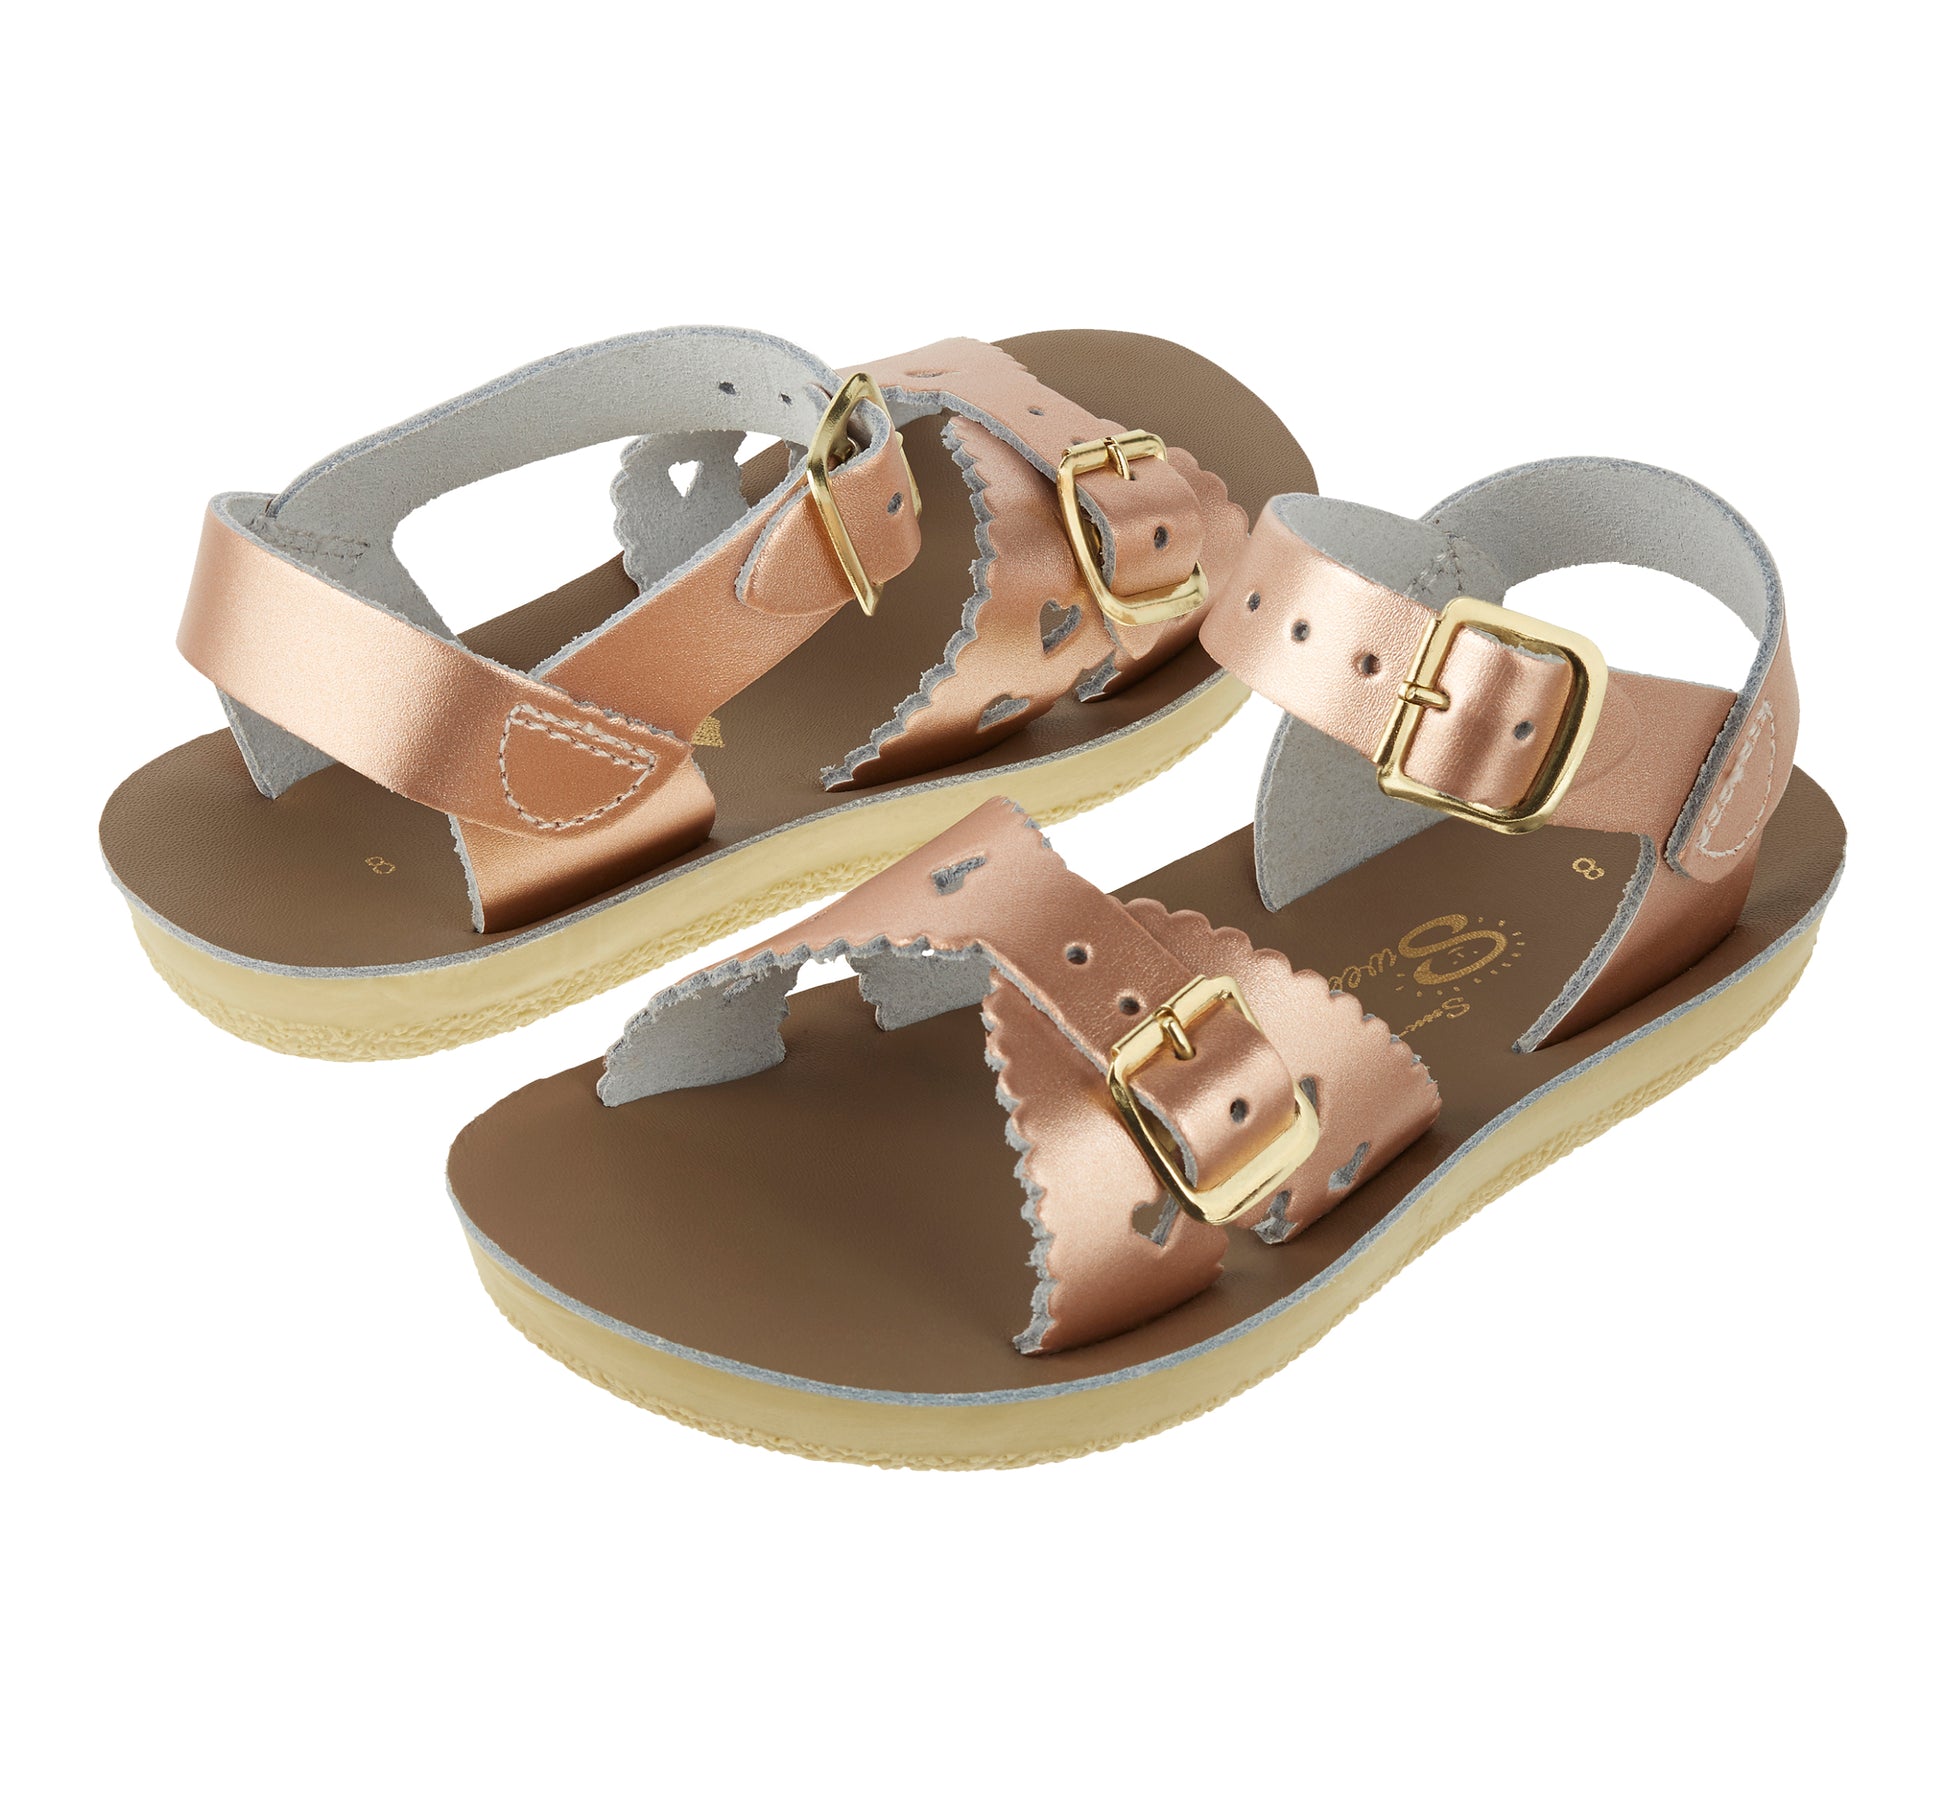 A girls sandal by Salt Water Sandal in rose gold with double buckle fastening across the instep and around the ankle. Featuring scallop edge and punched out heart detail. Side by side view.